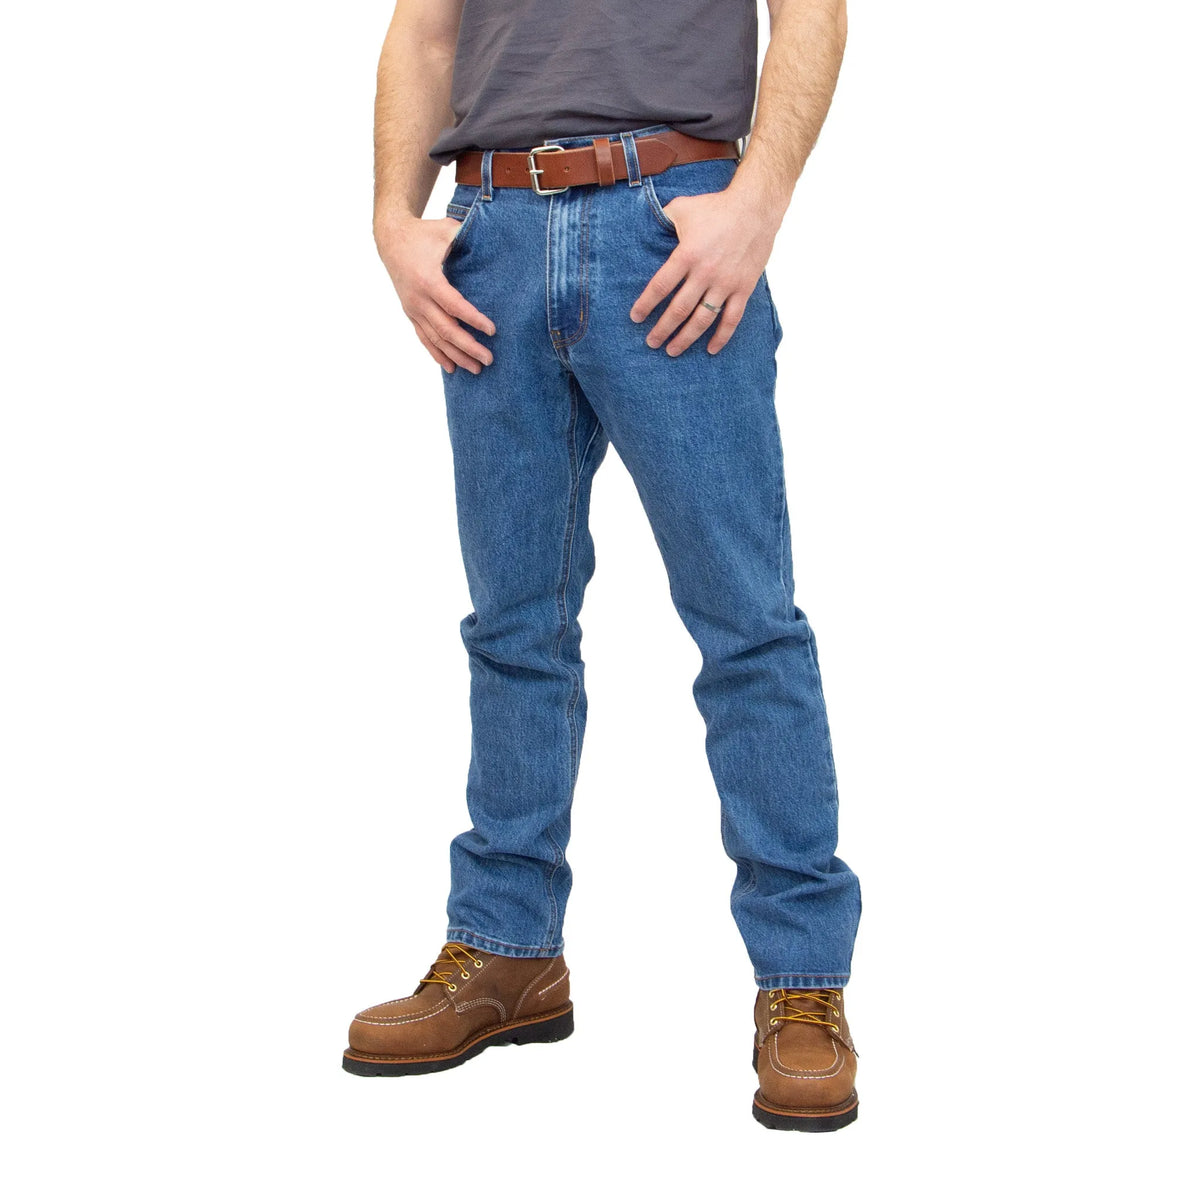 Stonewash American Made Jeans - All American Clothing Co